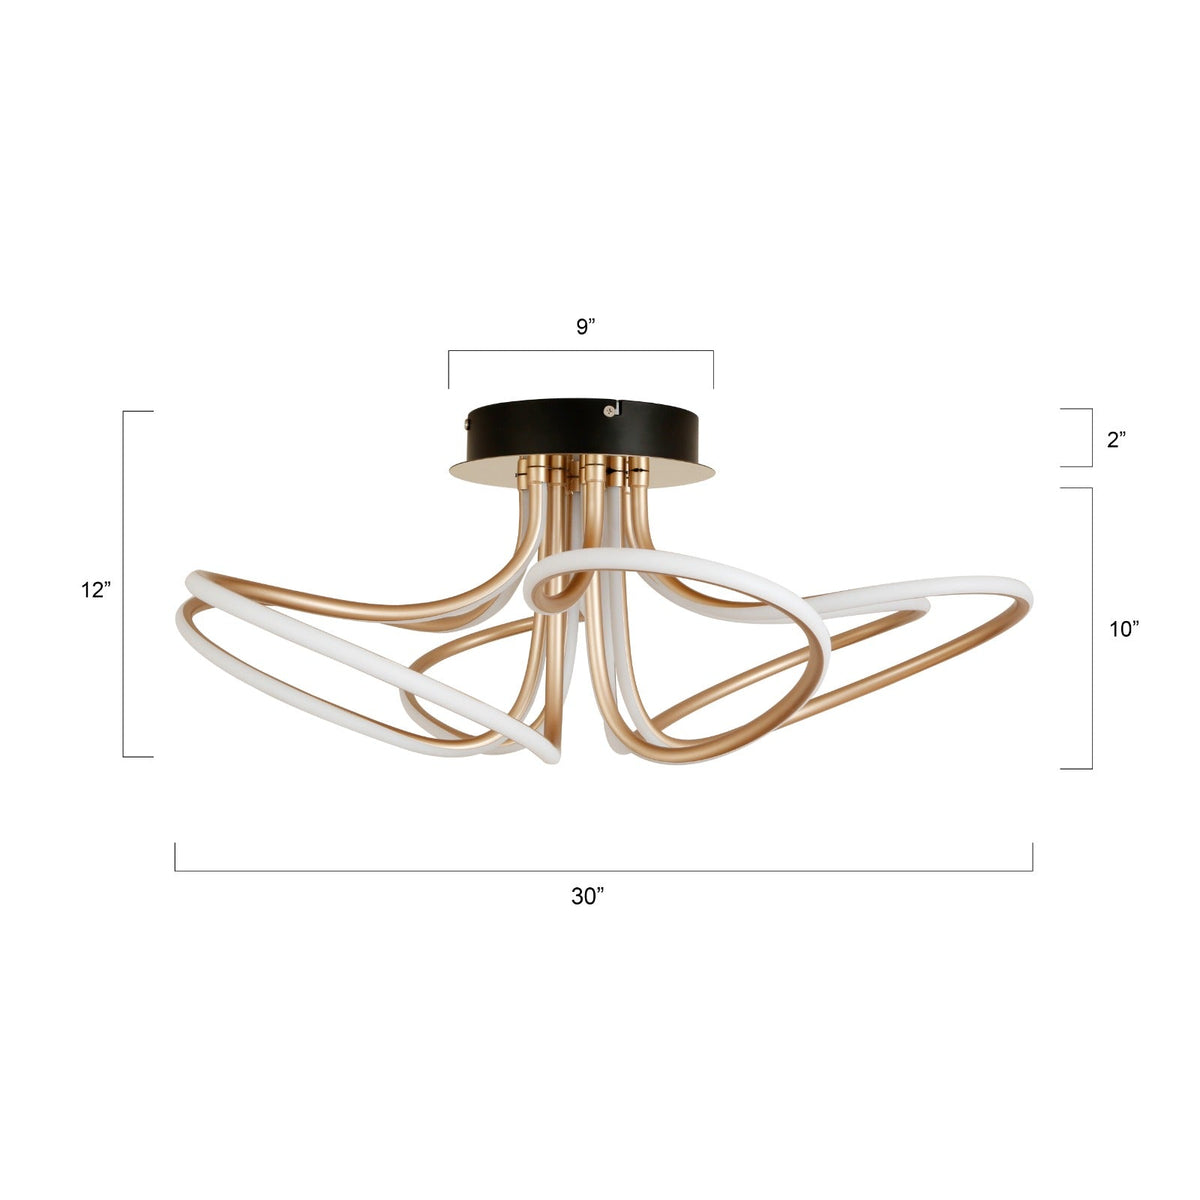 Buy Dancing with Stars (3 Colour Light) LED Chandelier Dining